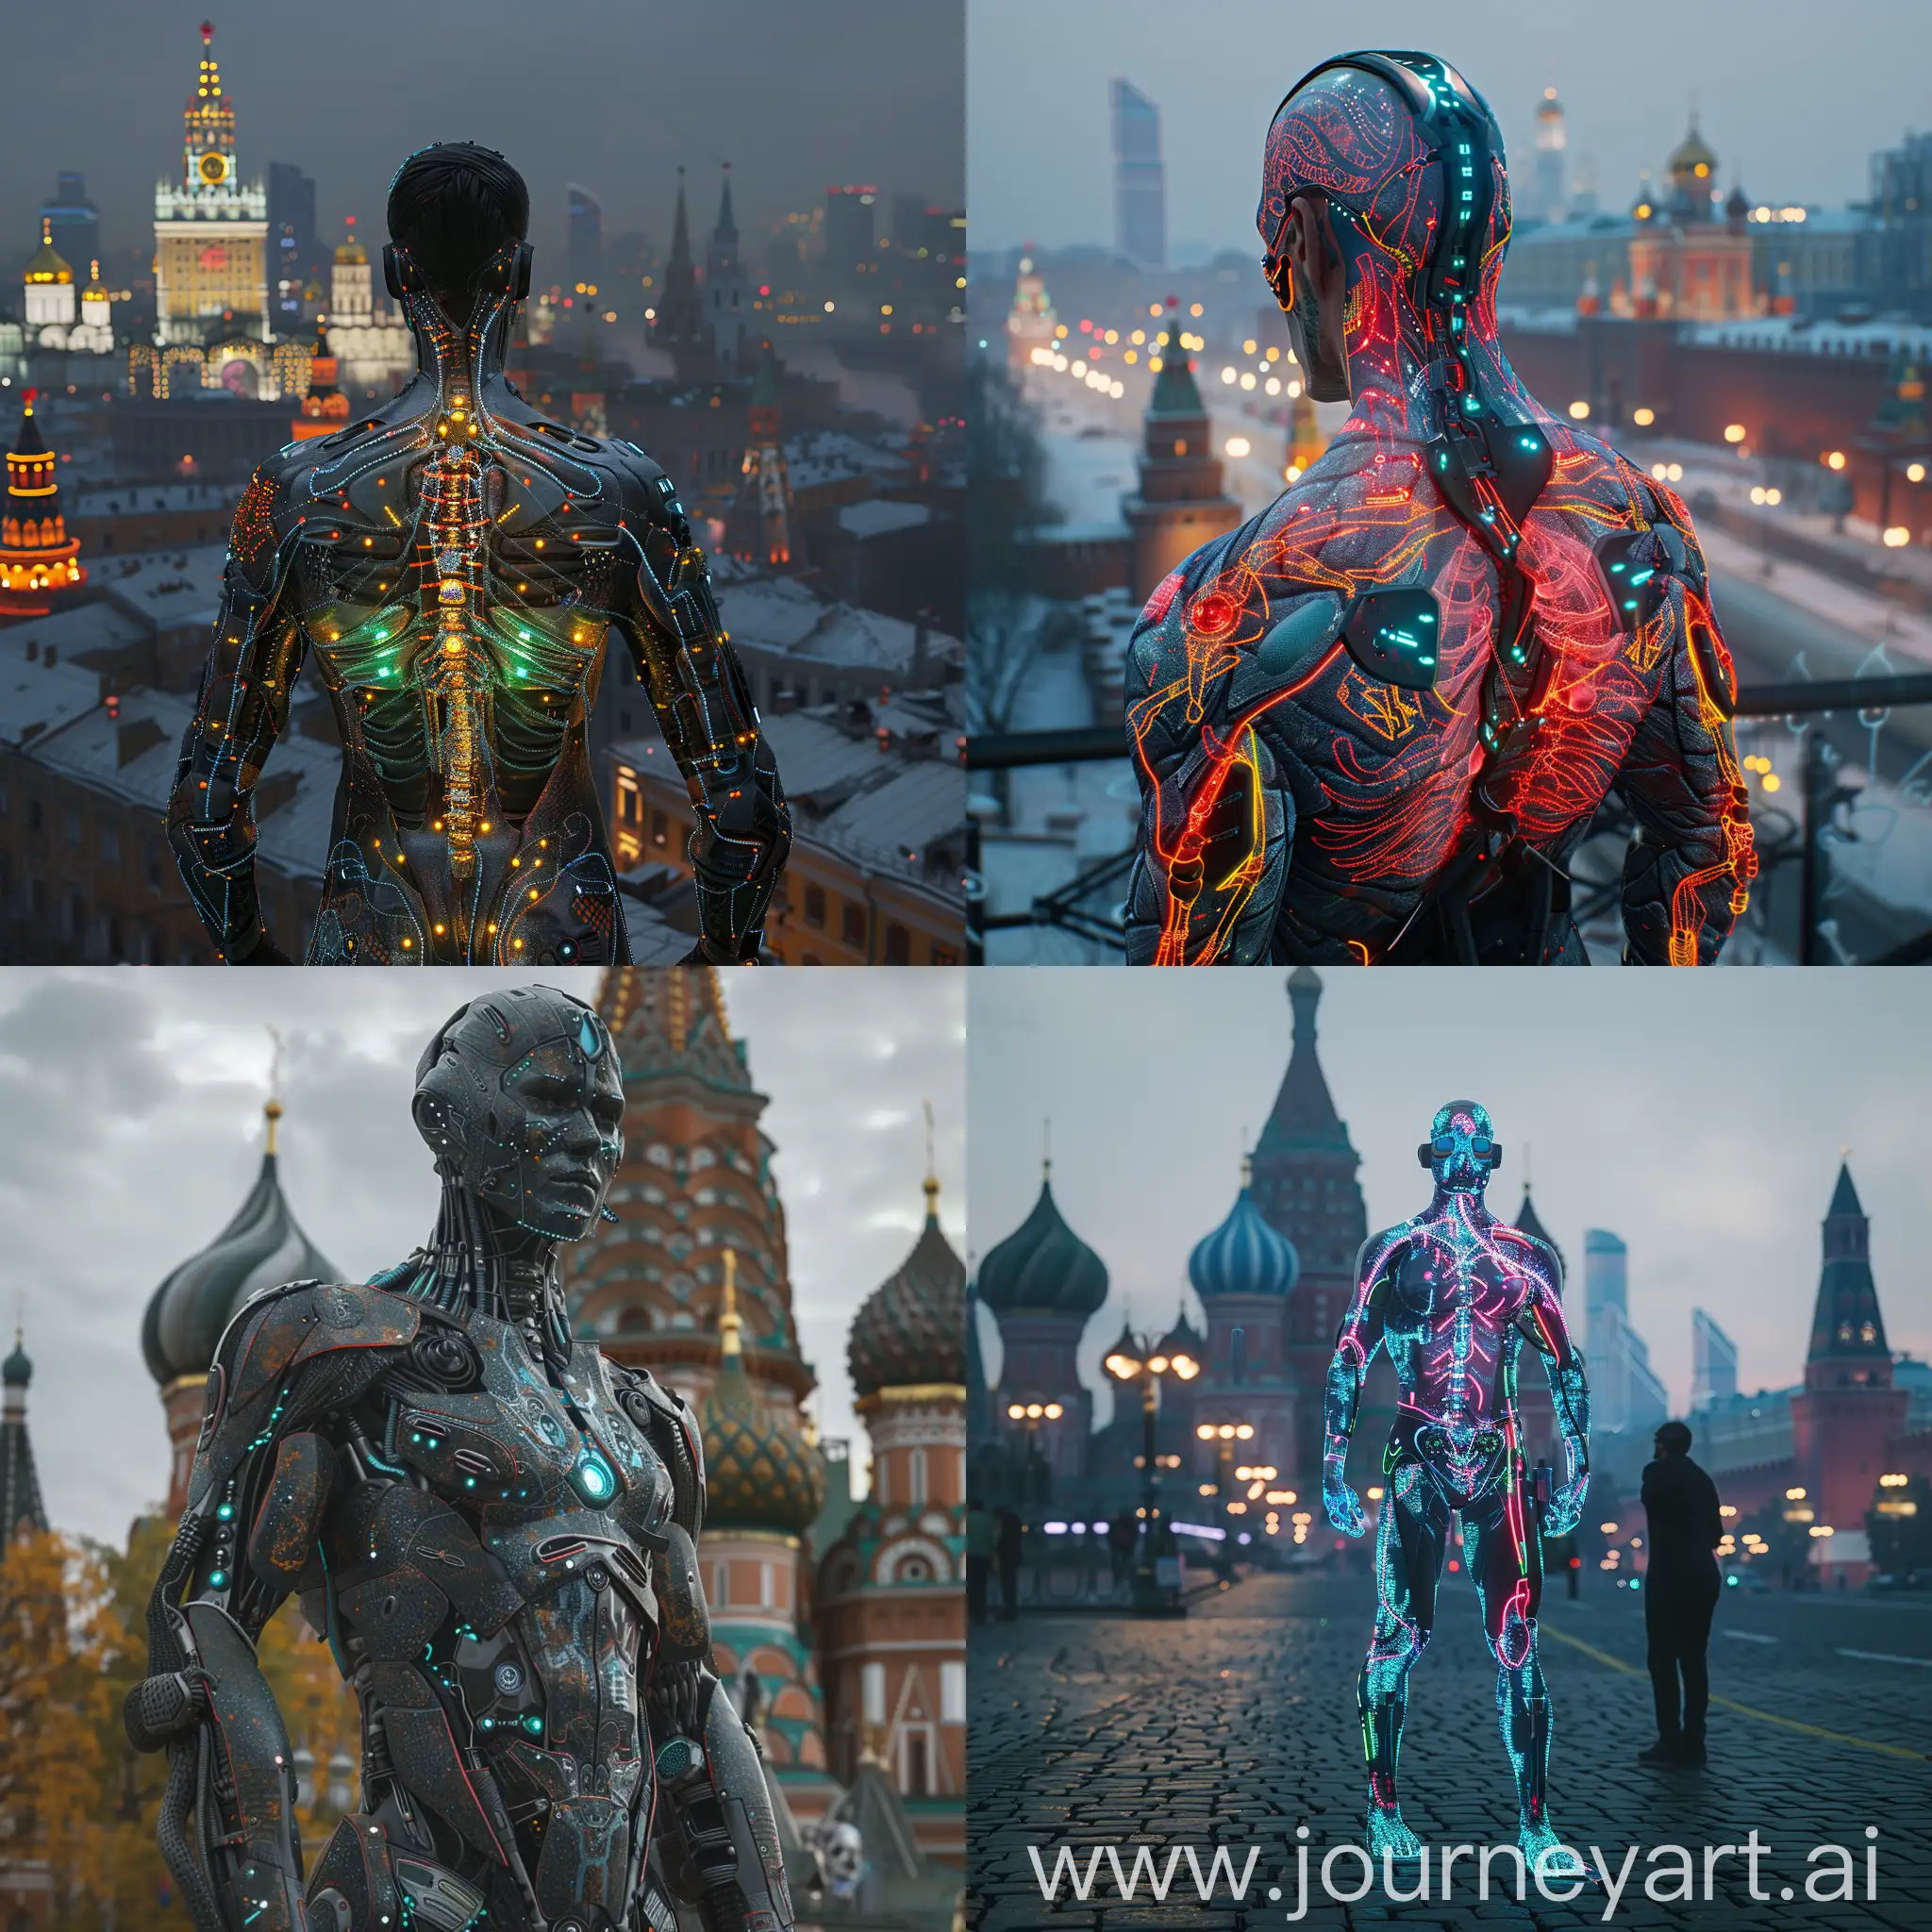 Futuristic-Moscow-Cybernetic-Enhancements-and-Bioluminescent-Fashion